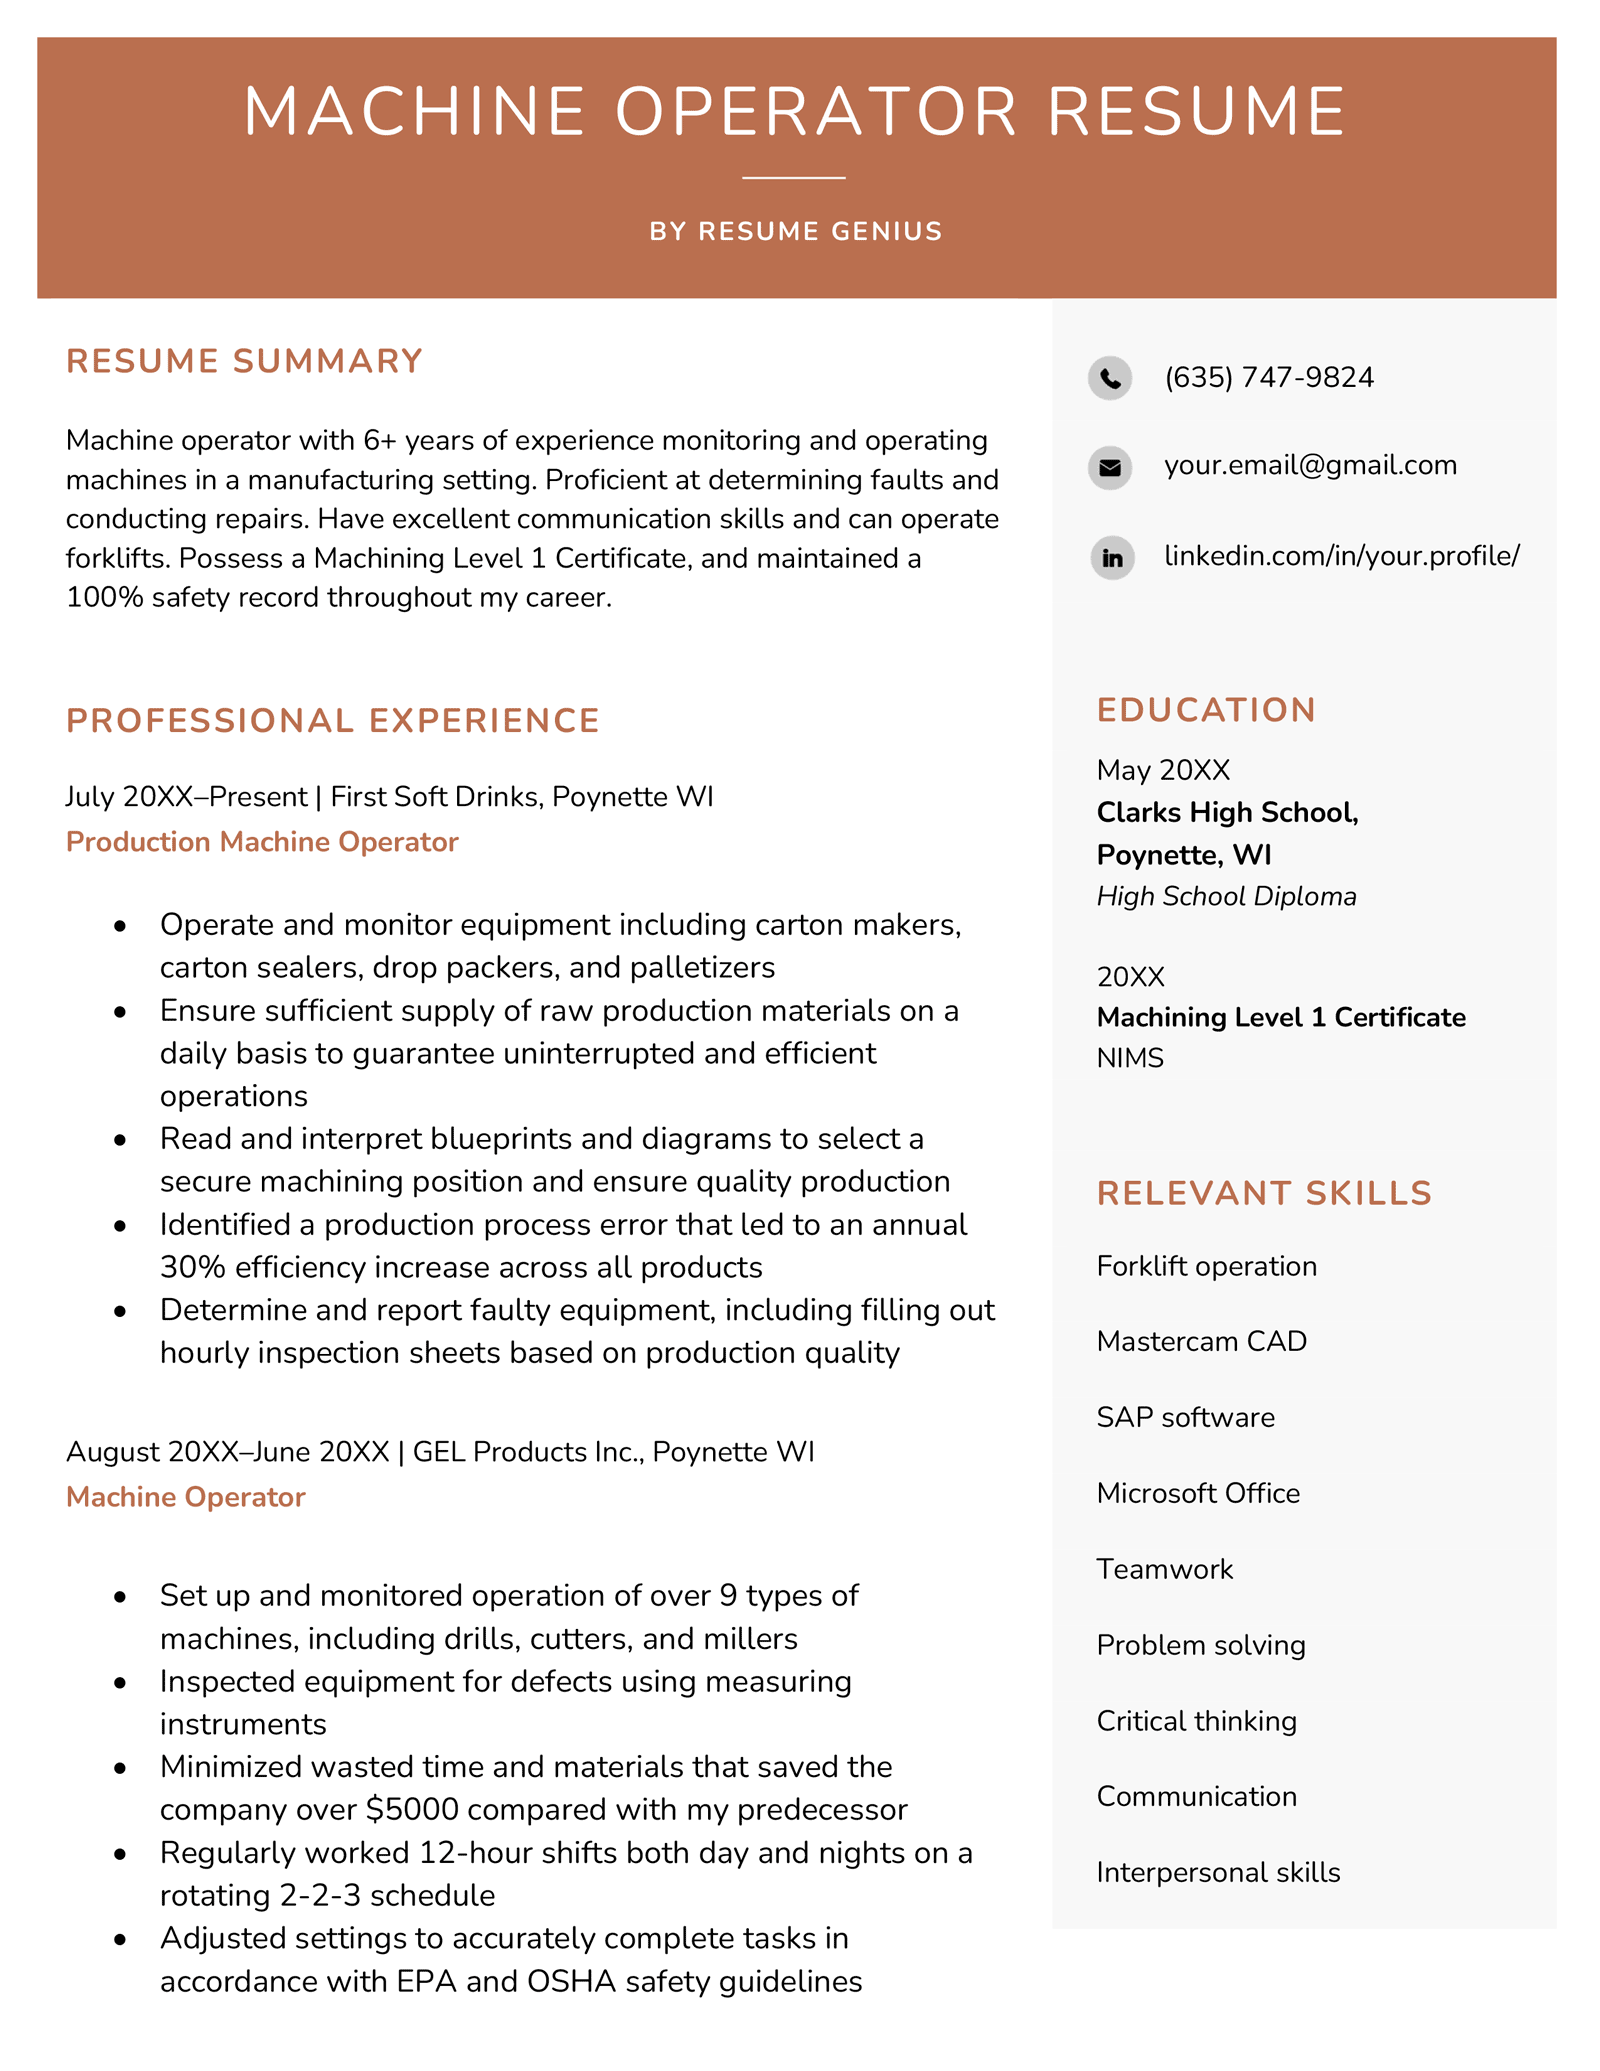 An example of a machine operator resume